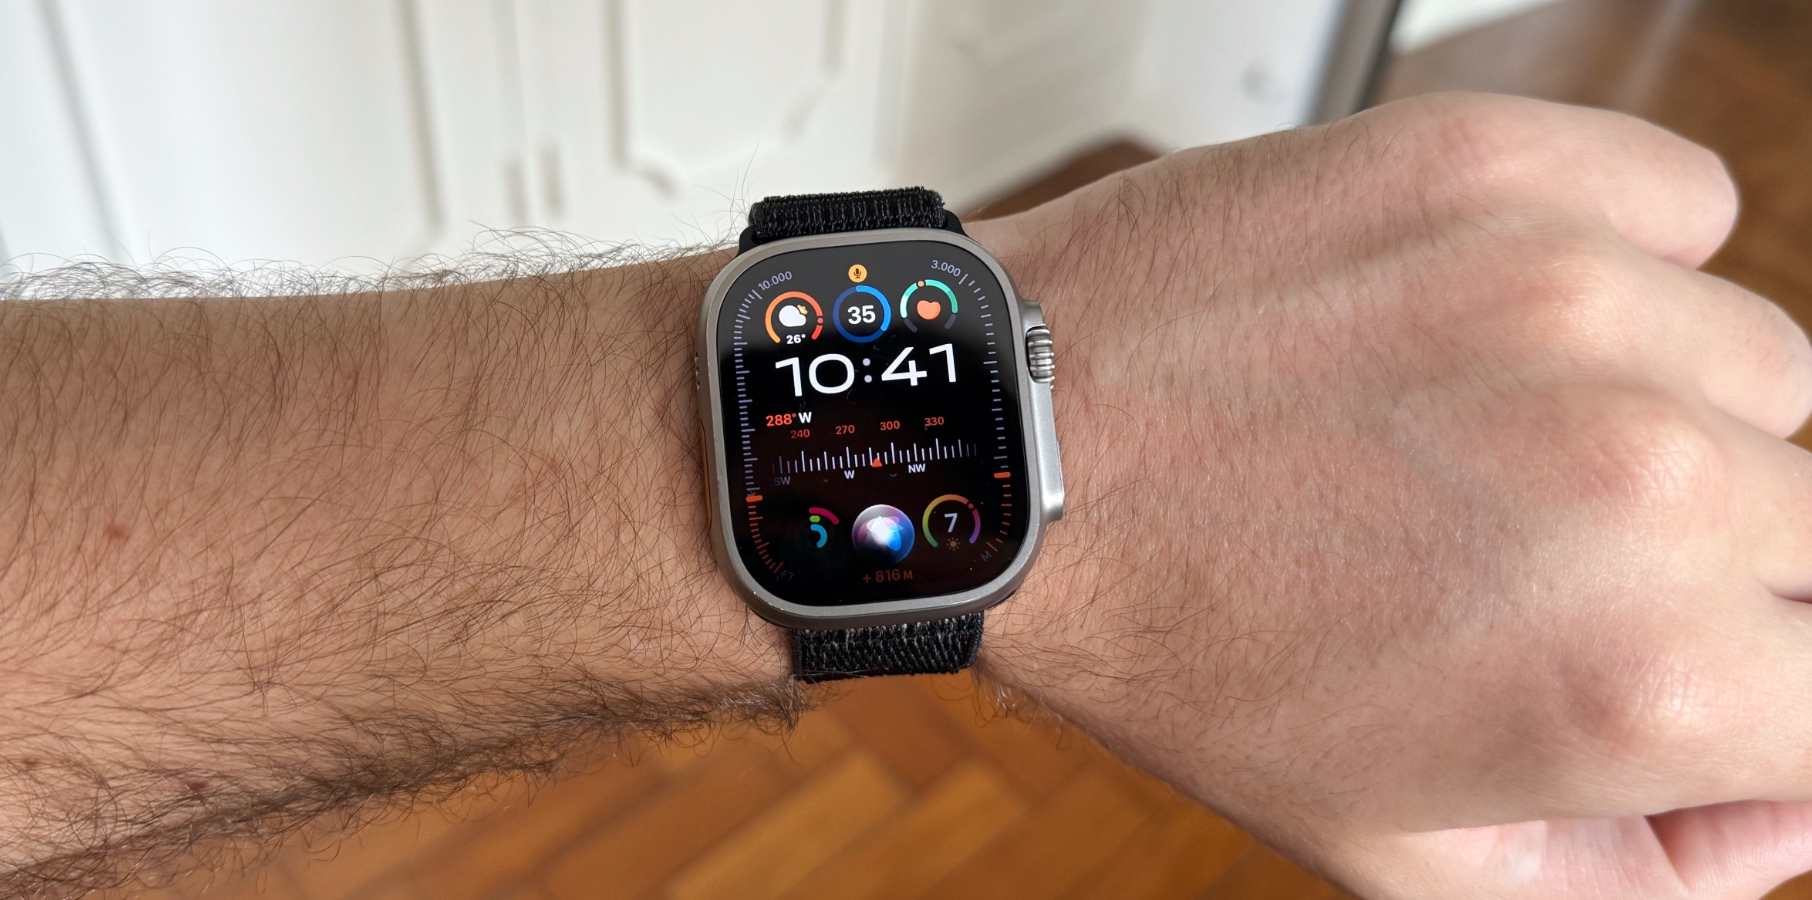 I might have to upgrade my Apple Watch just for Siri’s new health features